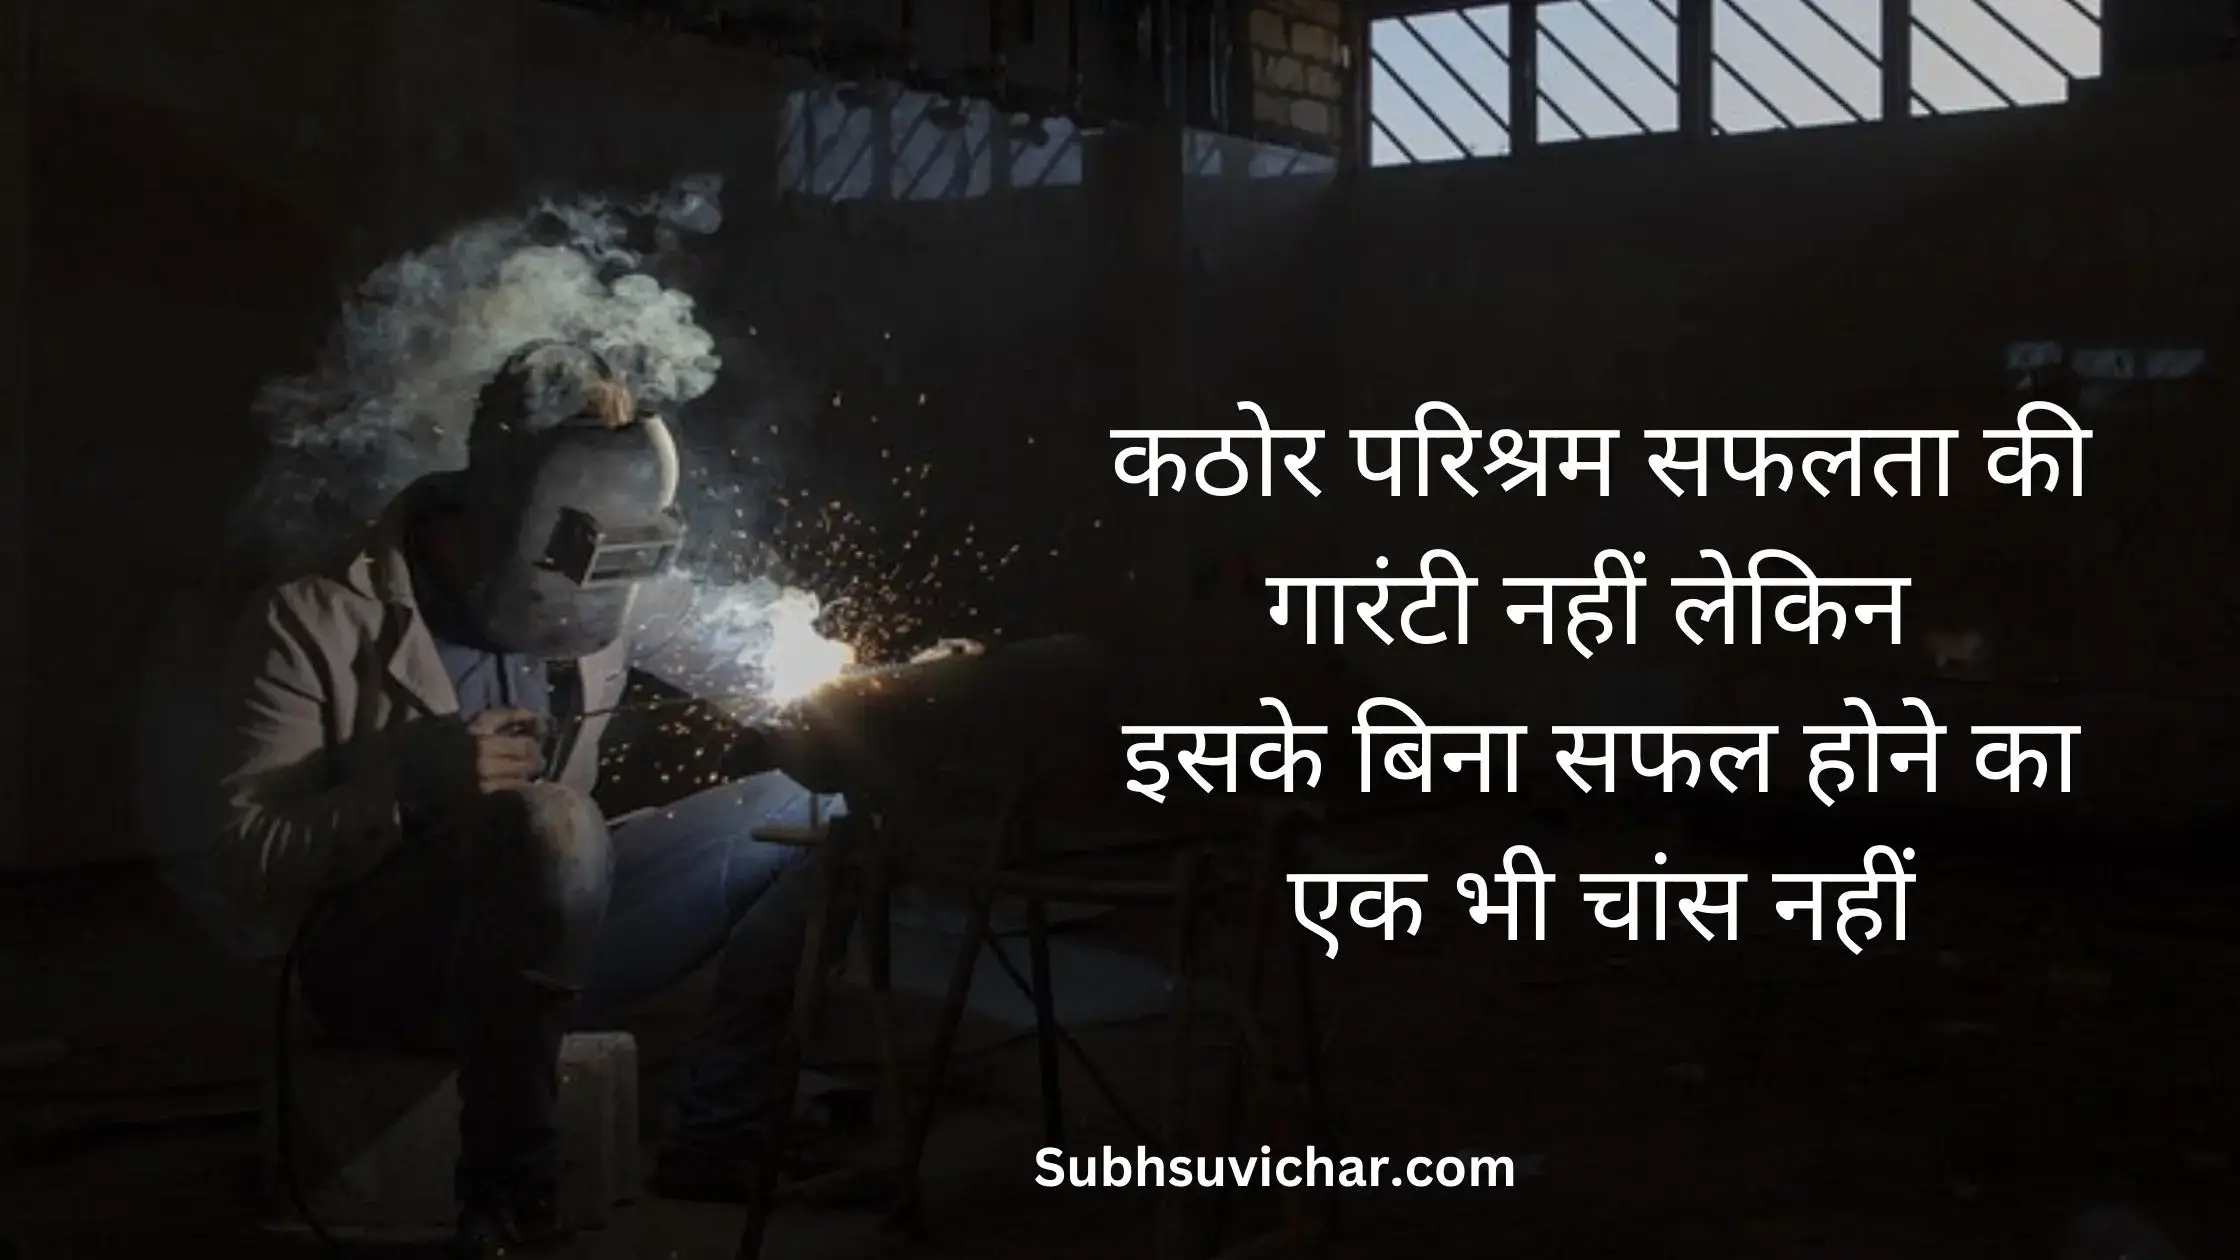 This post contains huge collection of success shayari in hindi font with high quality of images for your whatsaap and facebook status.